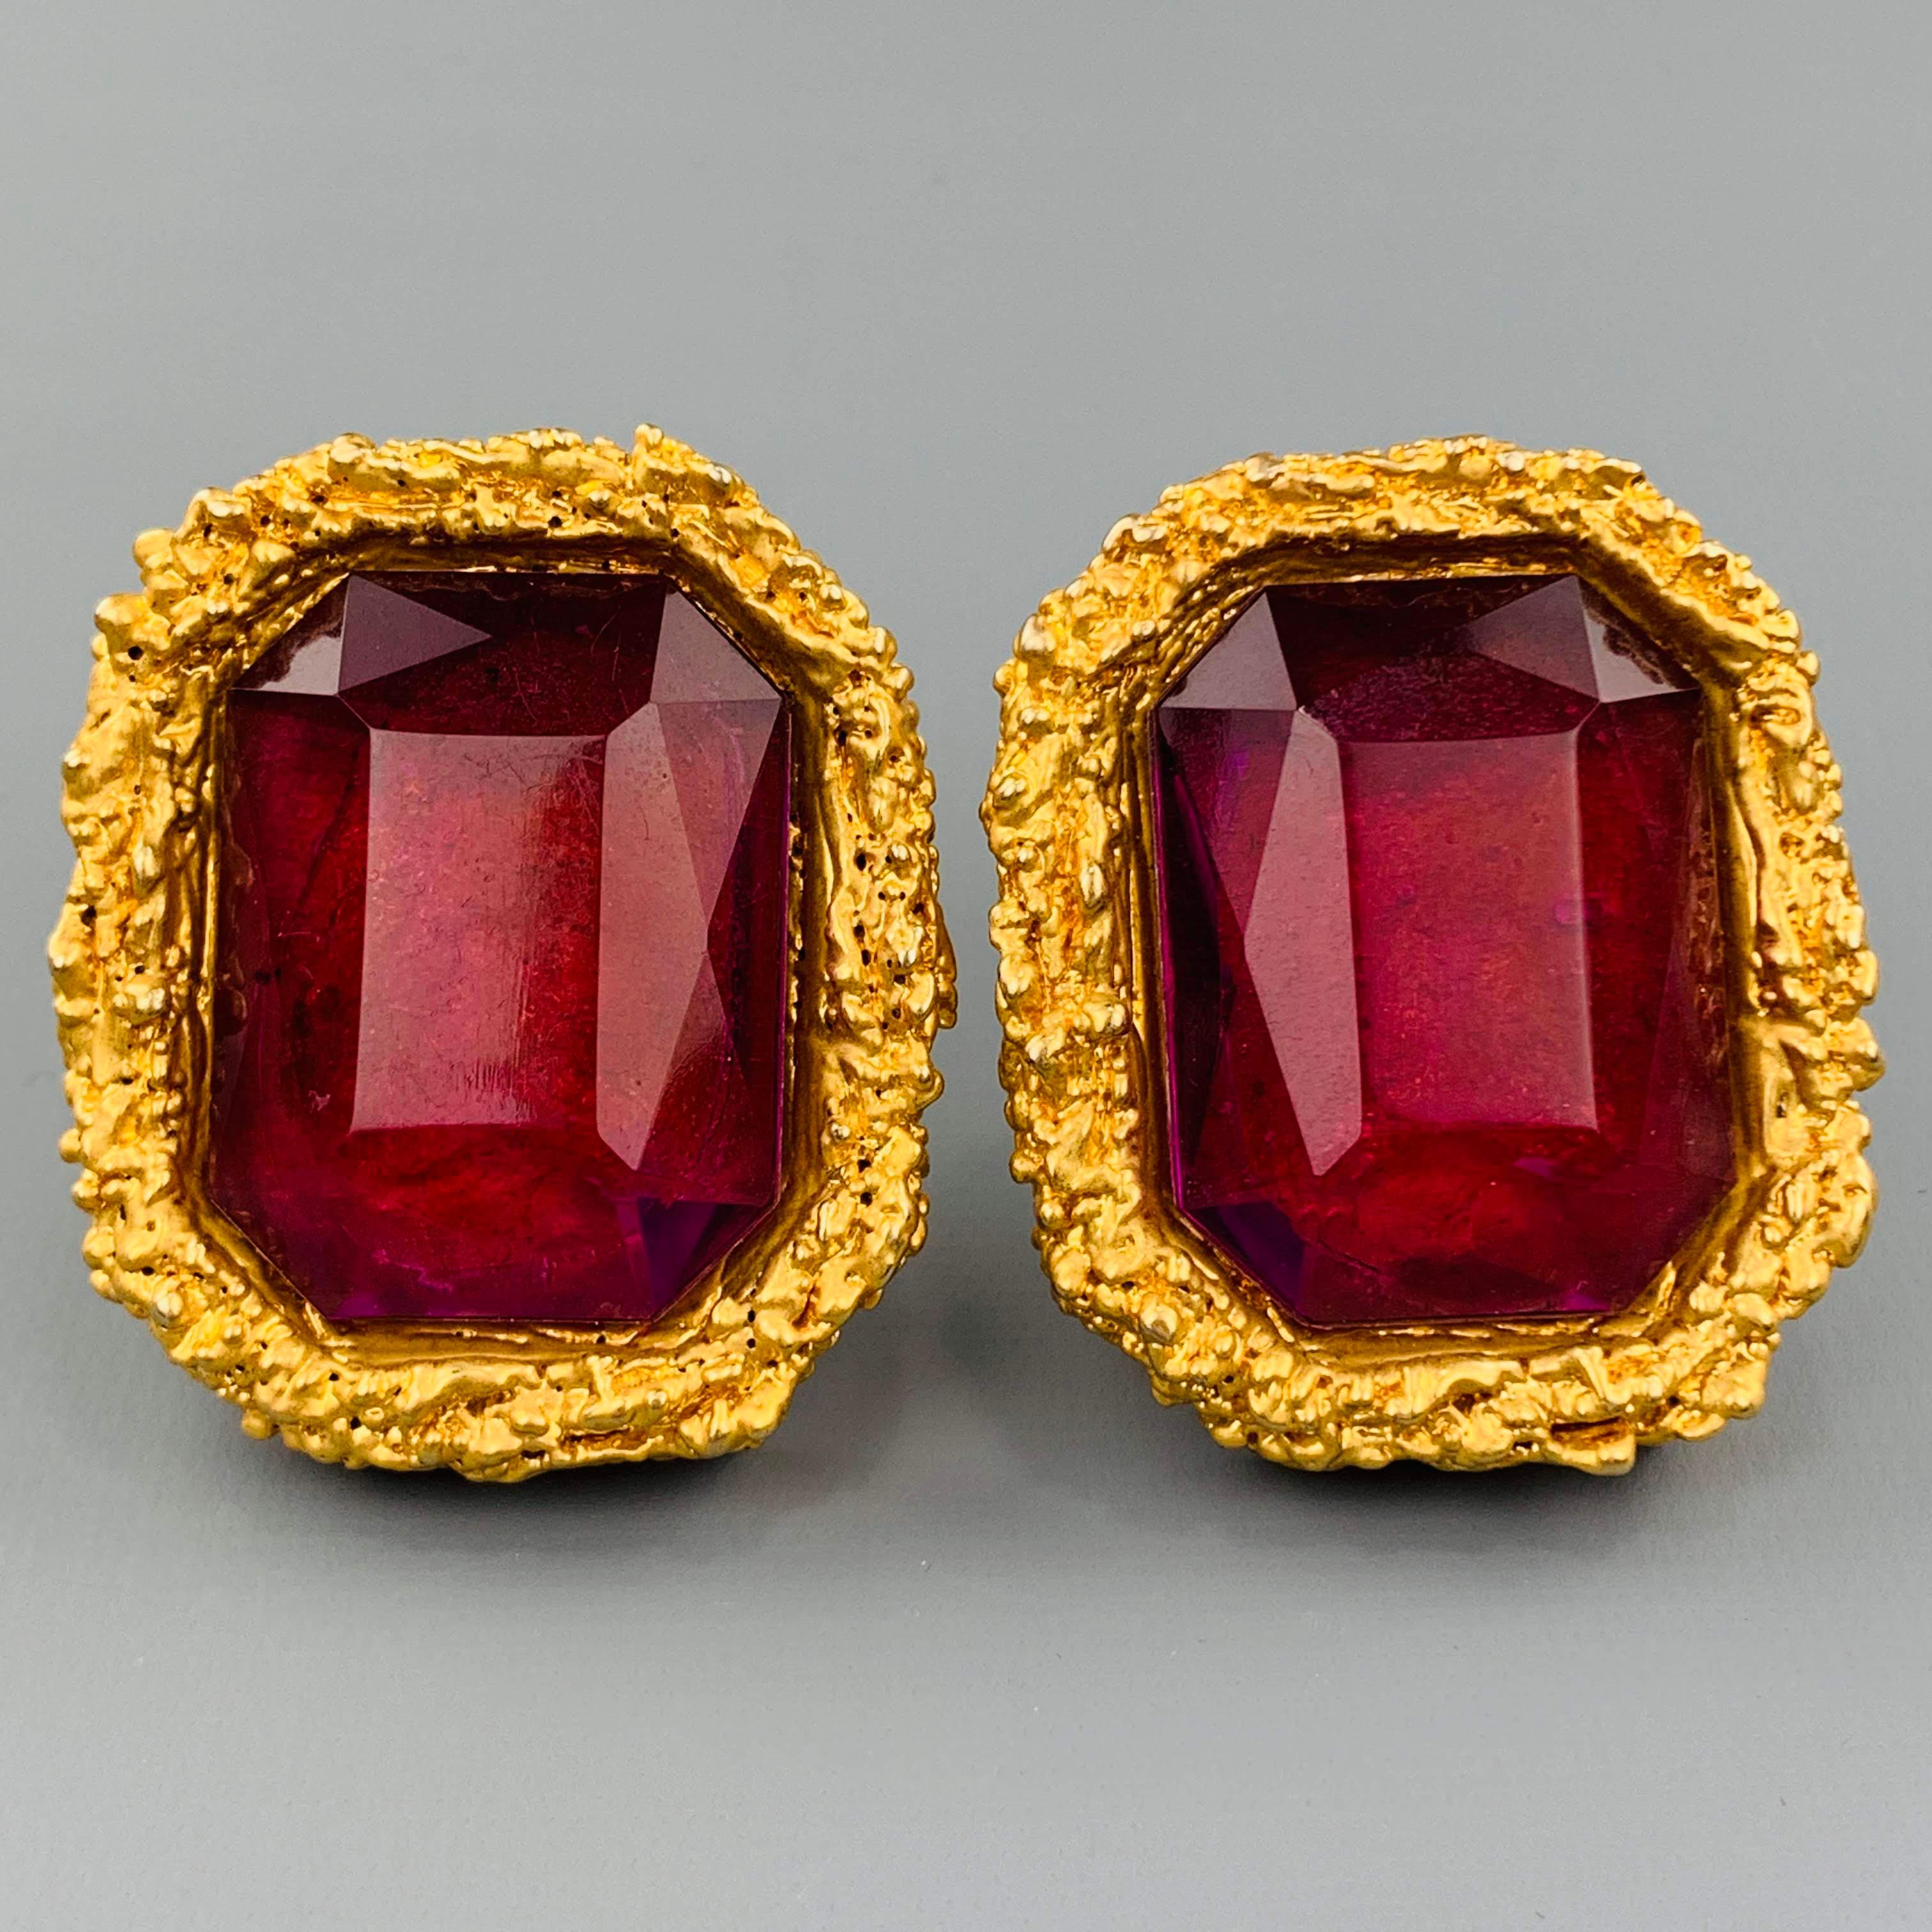 Vintage CHANEL Season 23 (Circa 1986-1992) clip on earrings feature a large, oversized fuchsia pink gem stone with textured yellow gold tone metal setting. Made in France.
 
Very Good Pre-Owned Condition.
Marked: 23
 
4 x 5 cm.